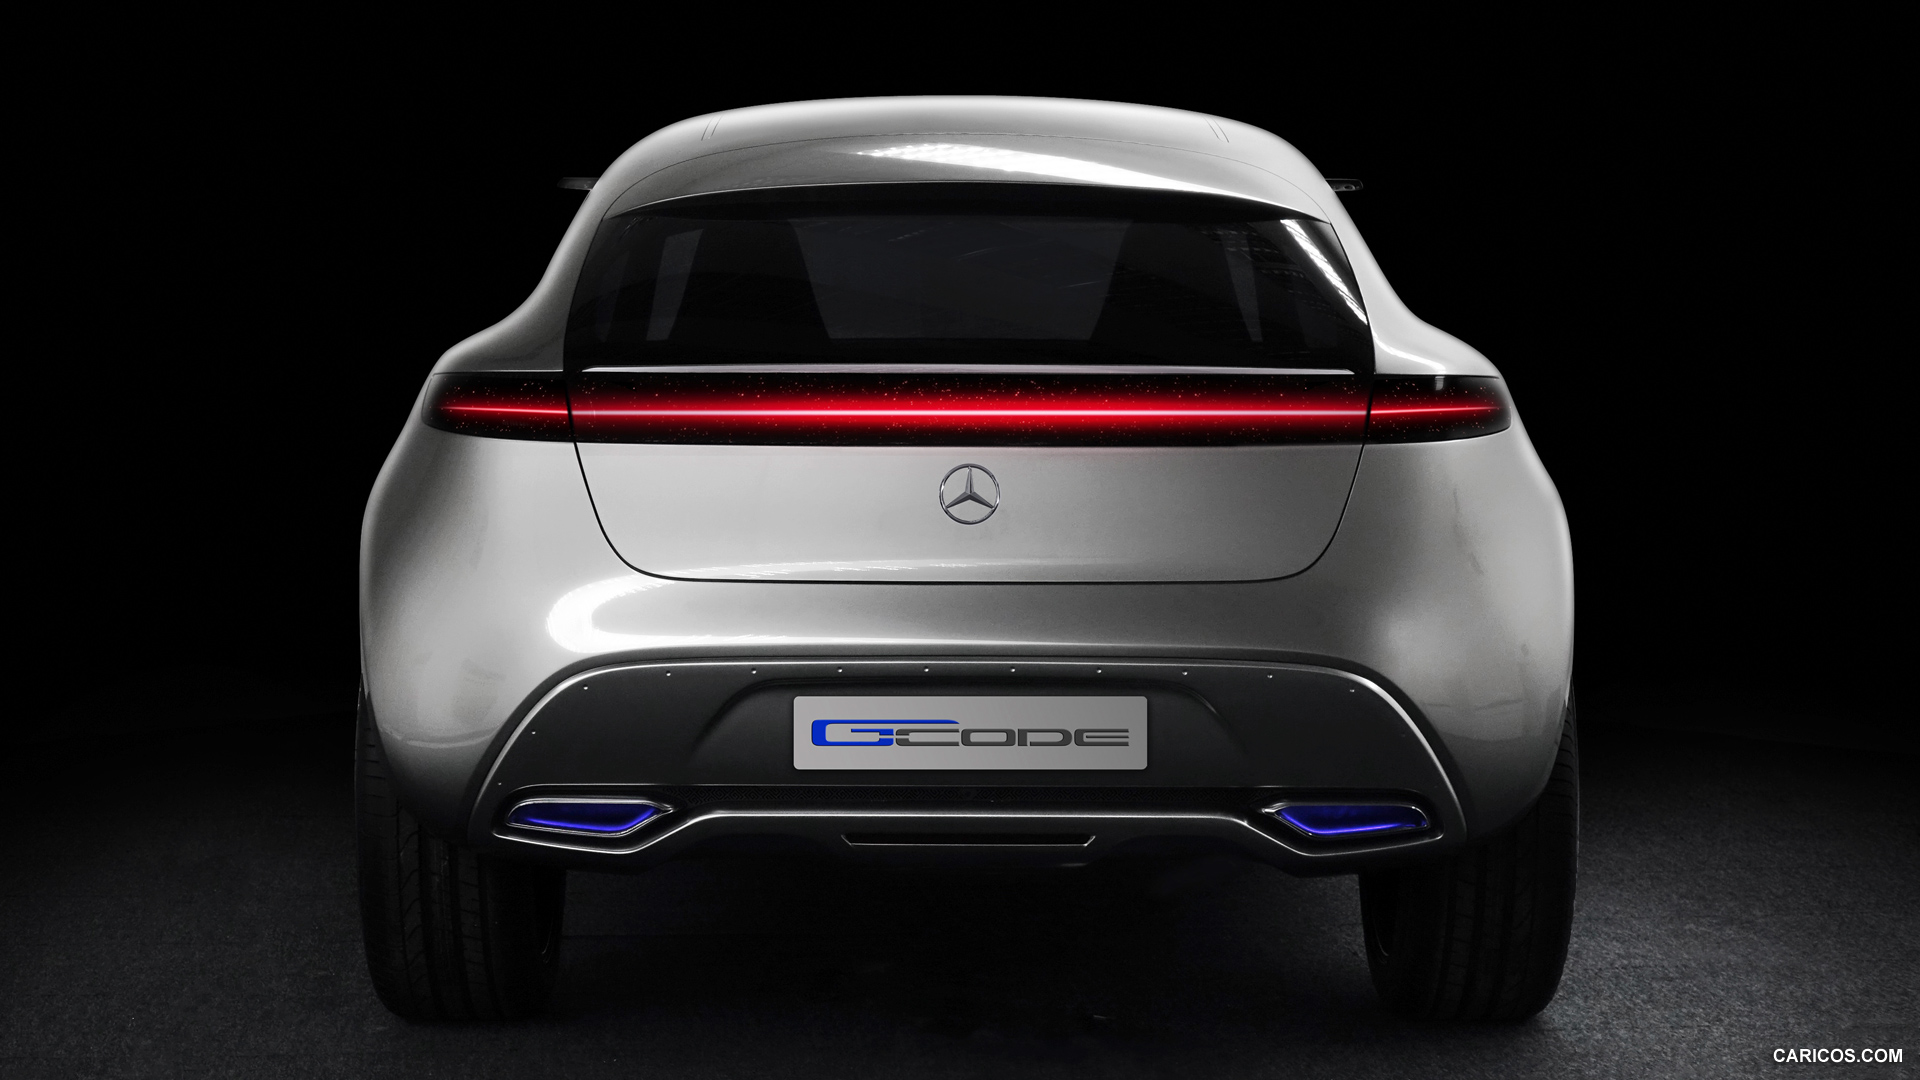 2014 Mercedes-Benz Vision G-Code SUC Concept  - Rear, #10 of 19